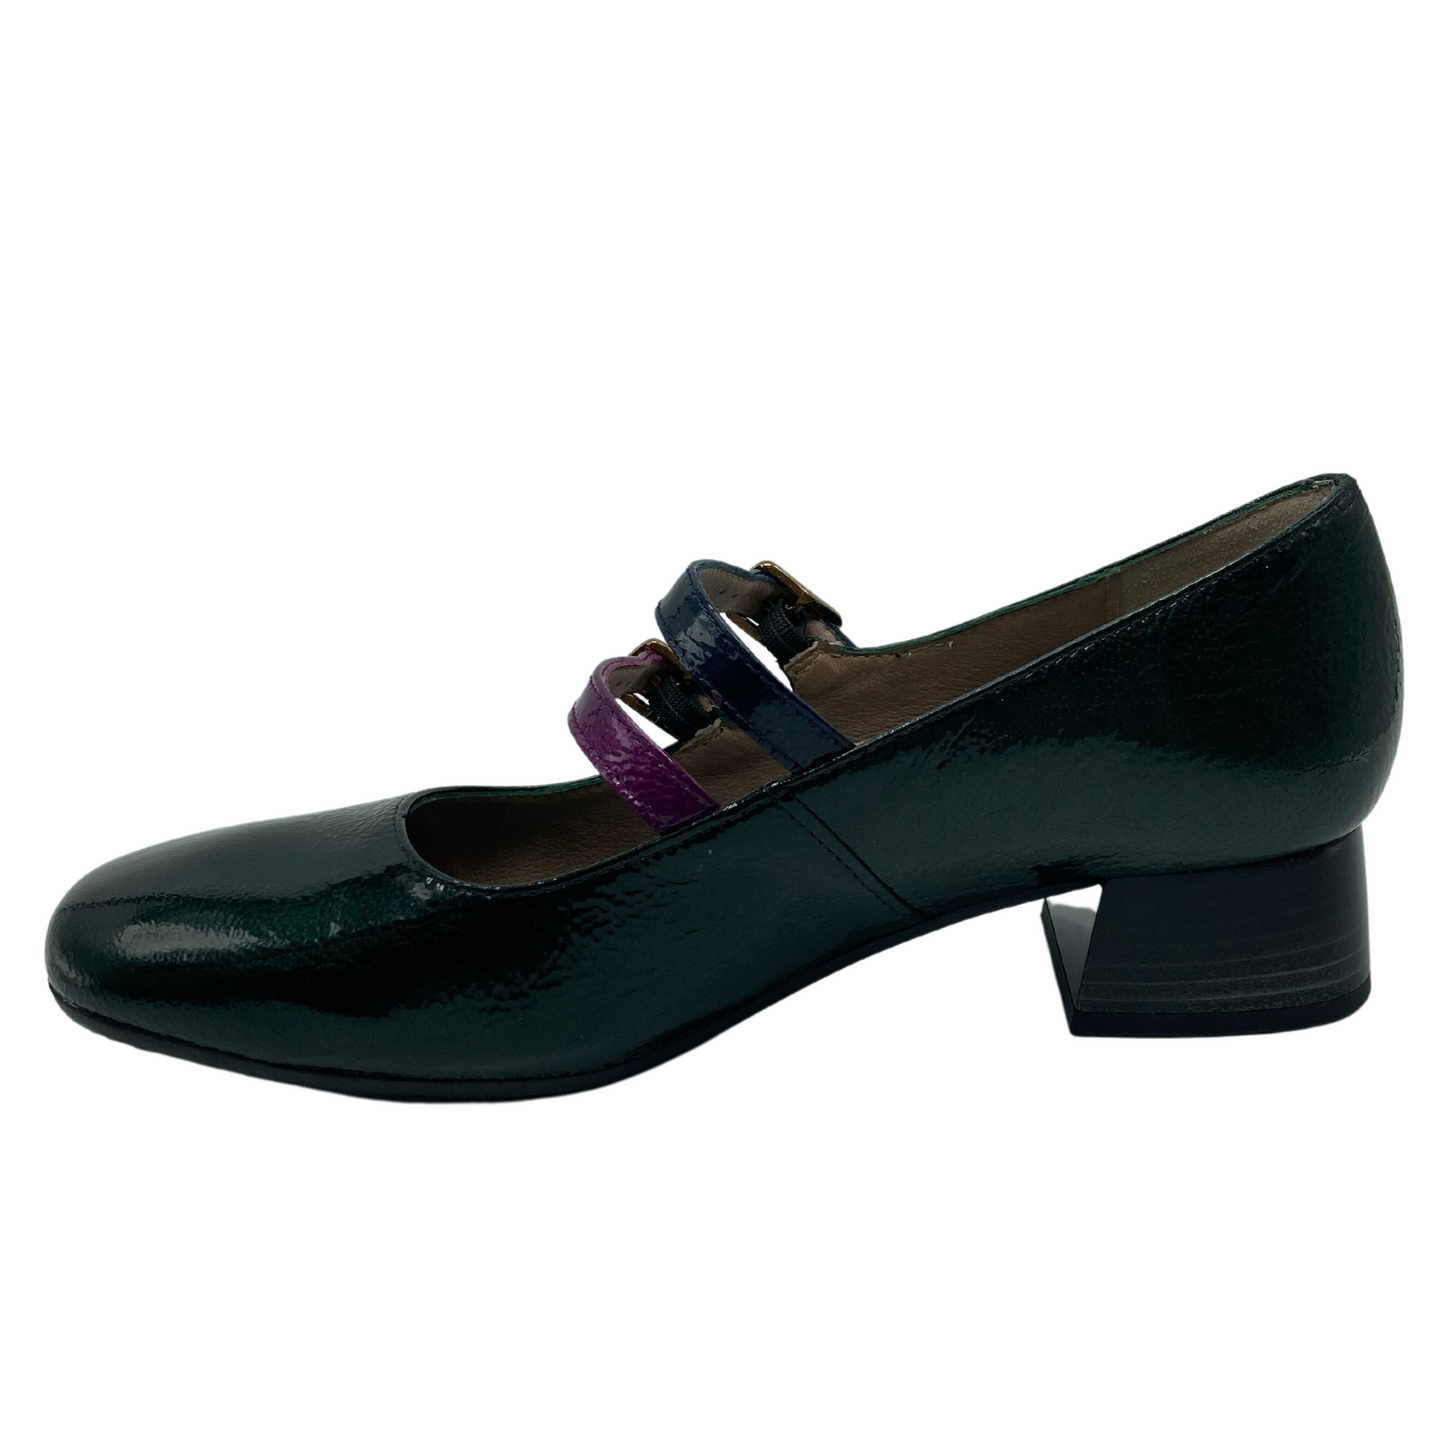 Left facing view of green leather shoe with block heel, one purple strap and one navy strap